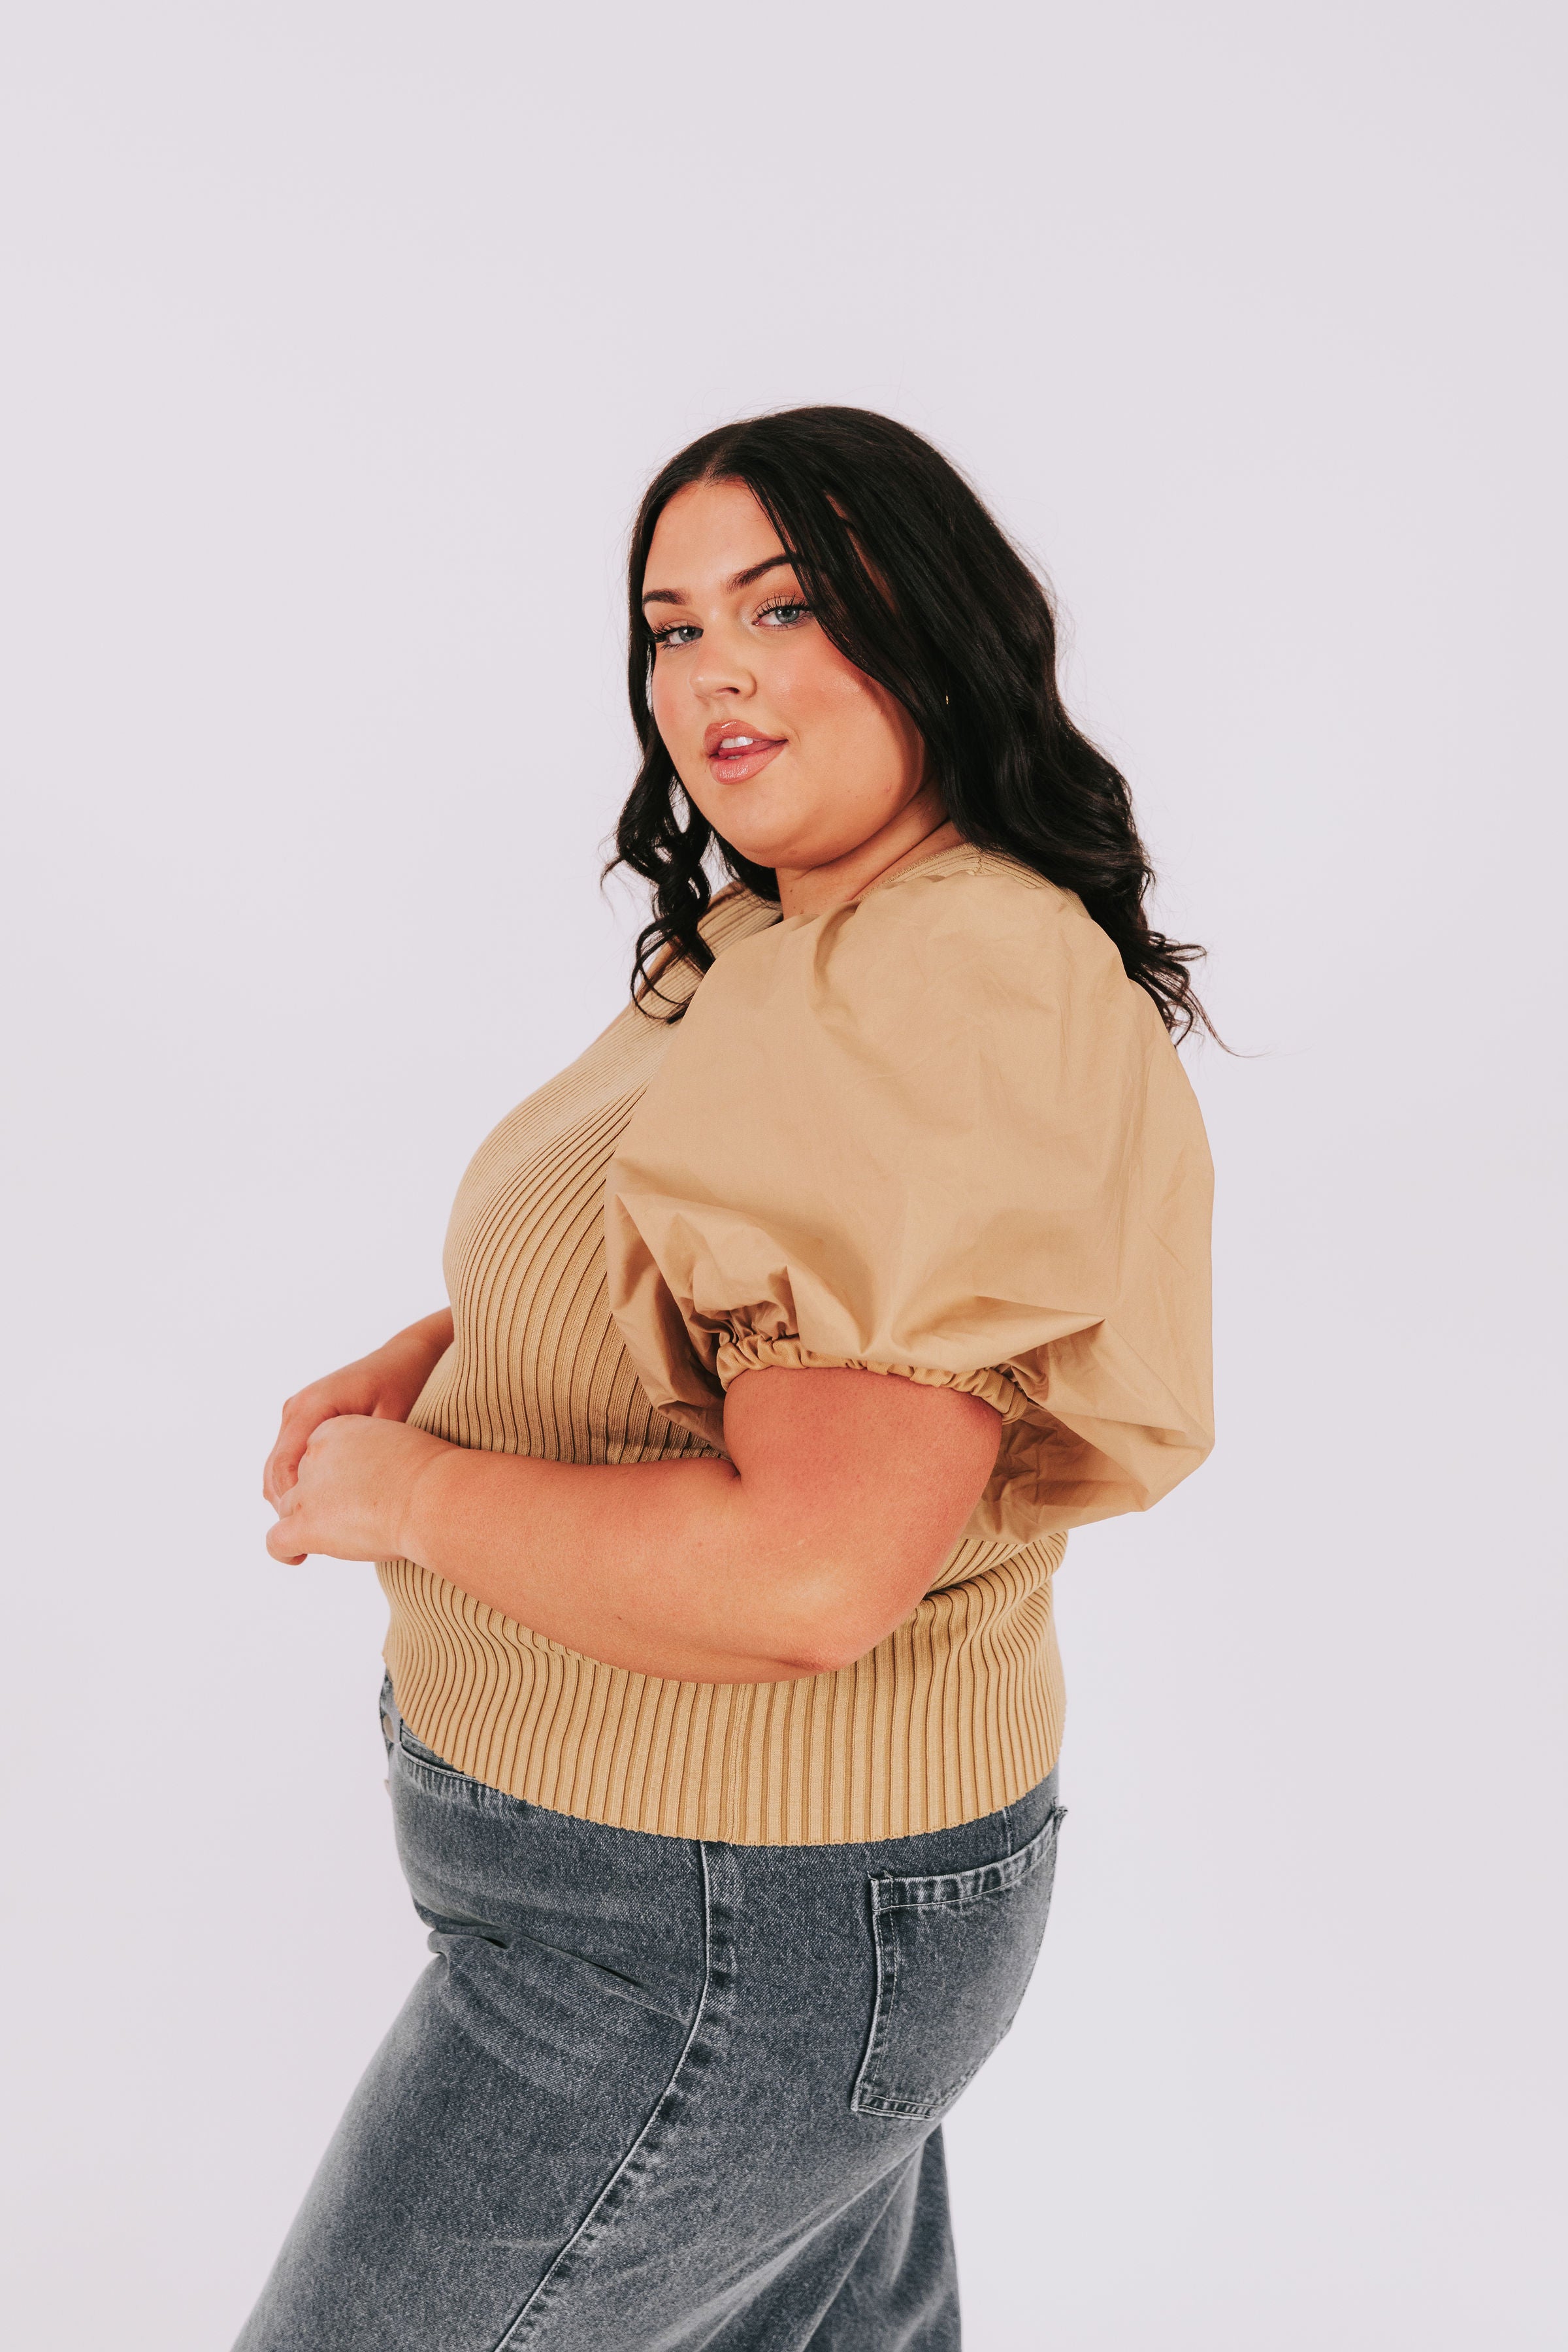 PLUS SIZE - Lost My Way Top